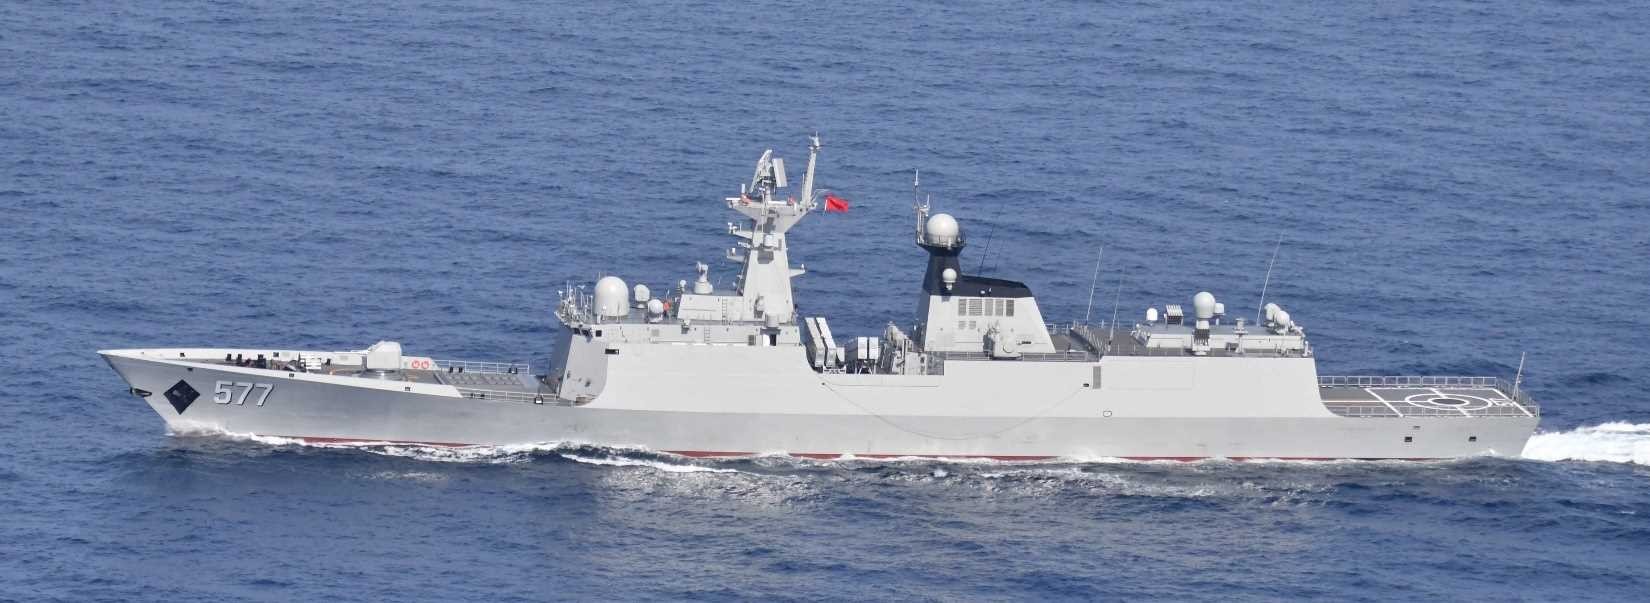 Image about China Launches Type 075 LHD, Pakistan Navy’s Second Type 054A/P Frigate